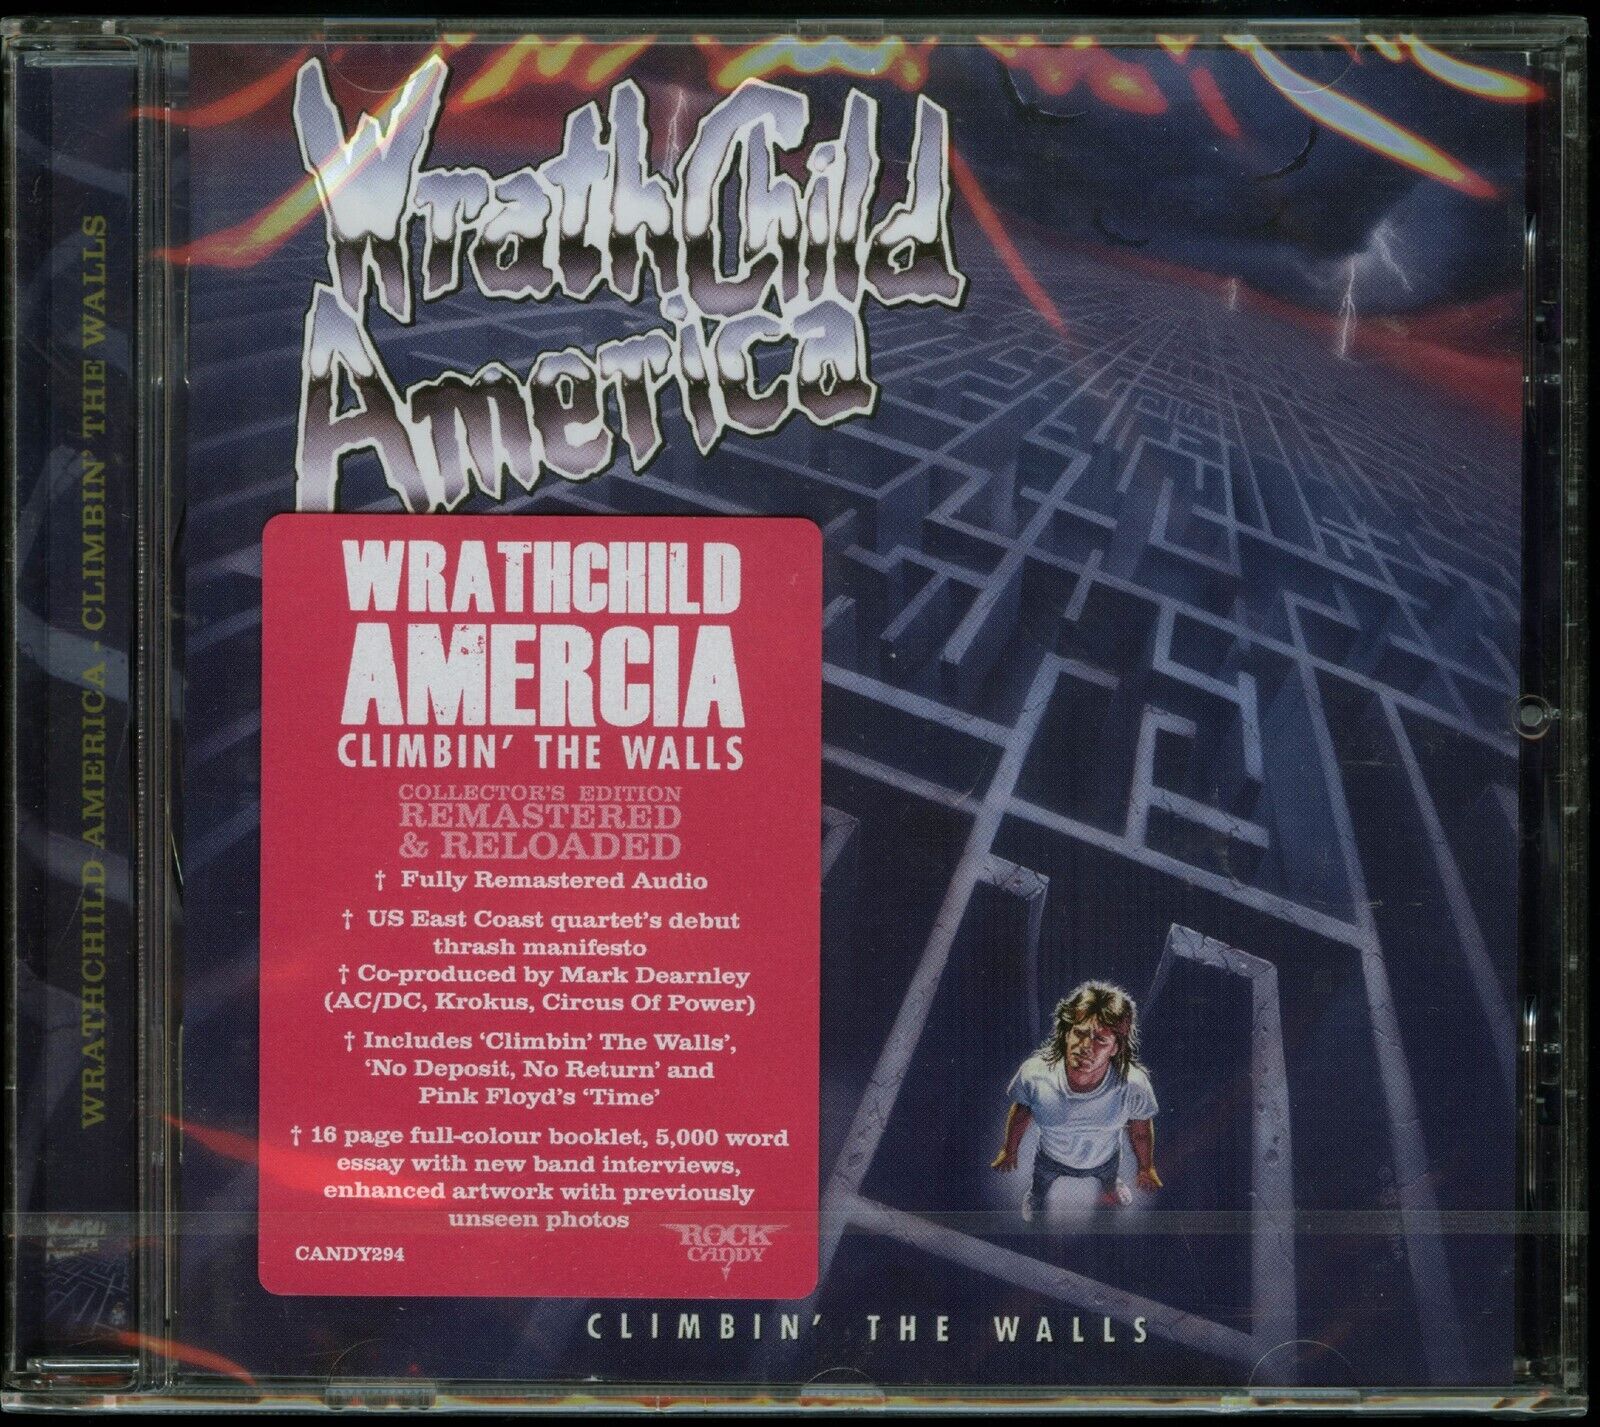 Wrathchild America Climbin\' The Walls CD new Rock Candy Records Remaster